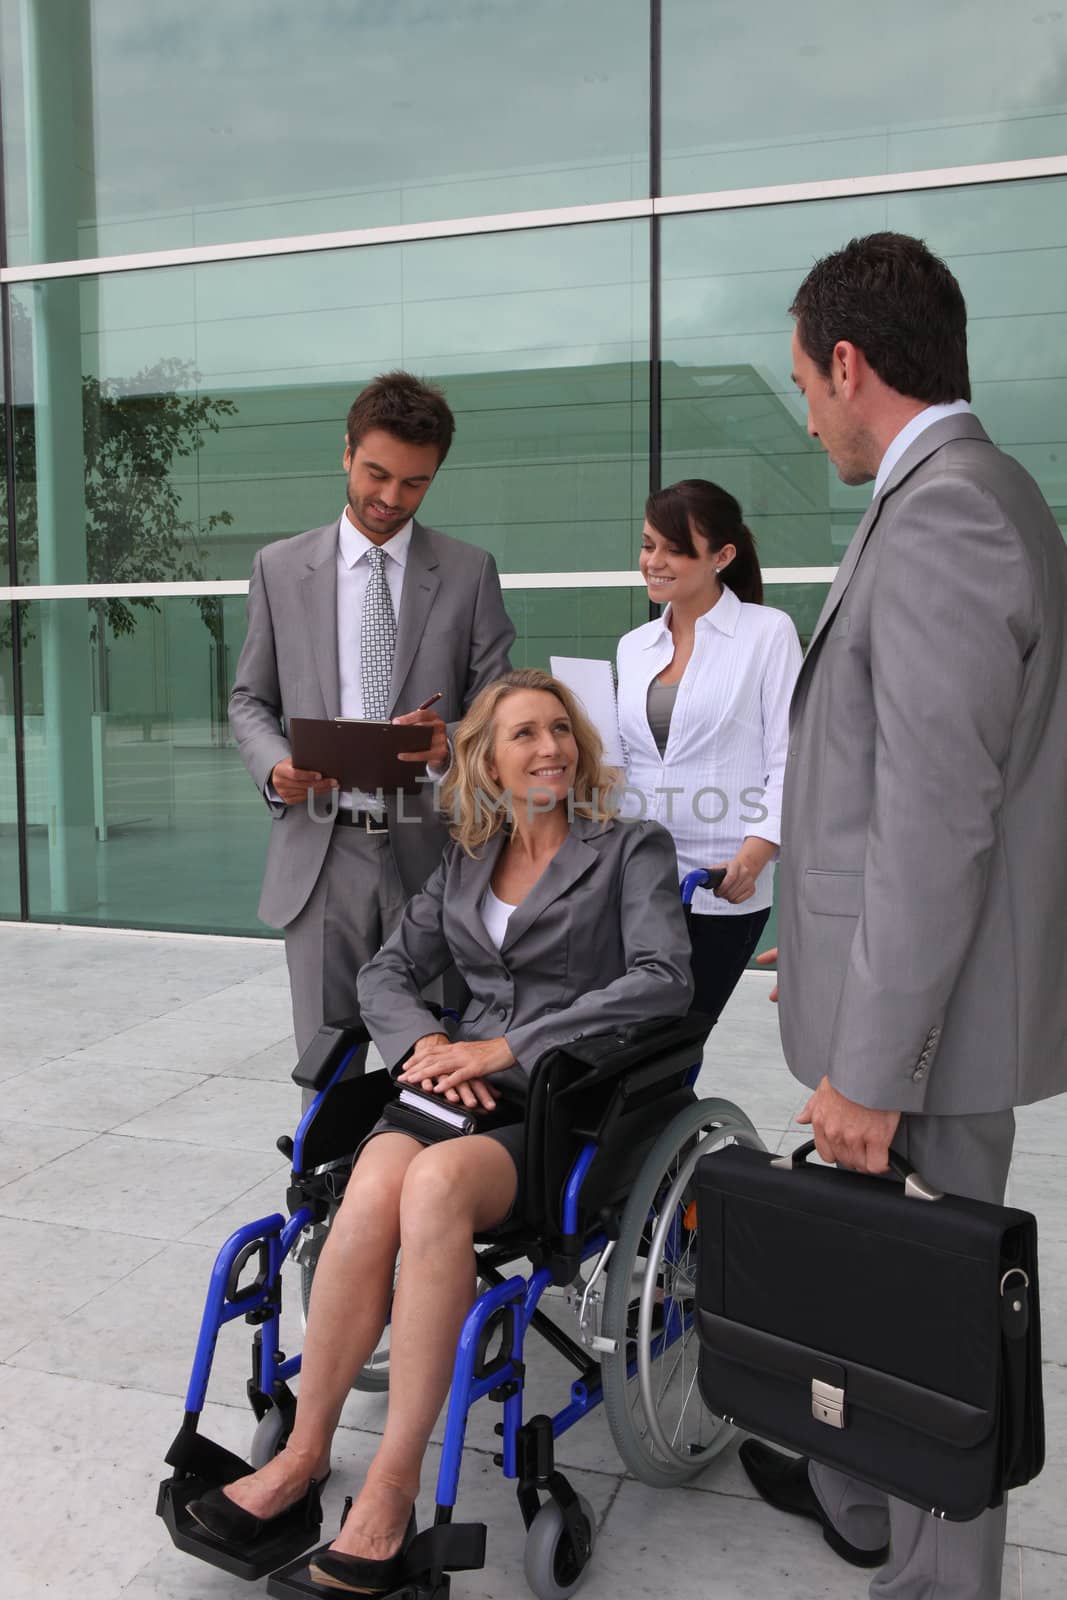 Businesswoman in a wheelchair with colleagues outside an office building